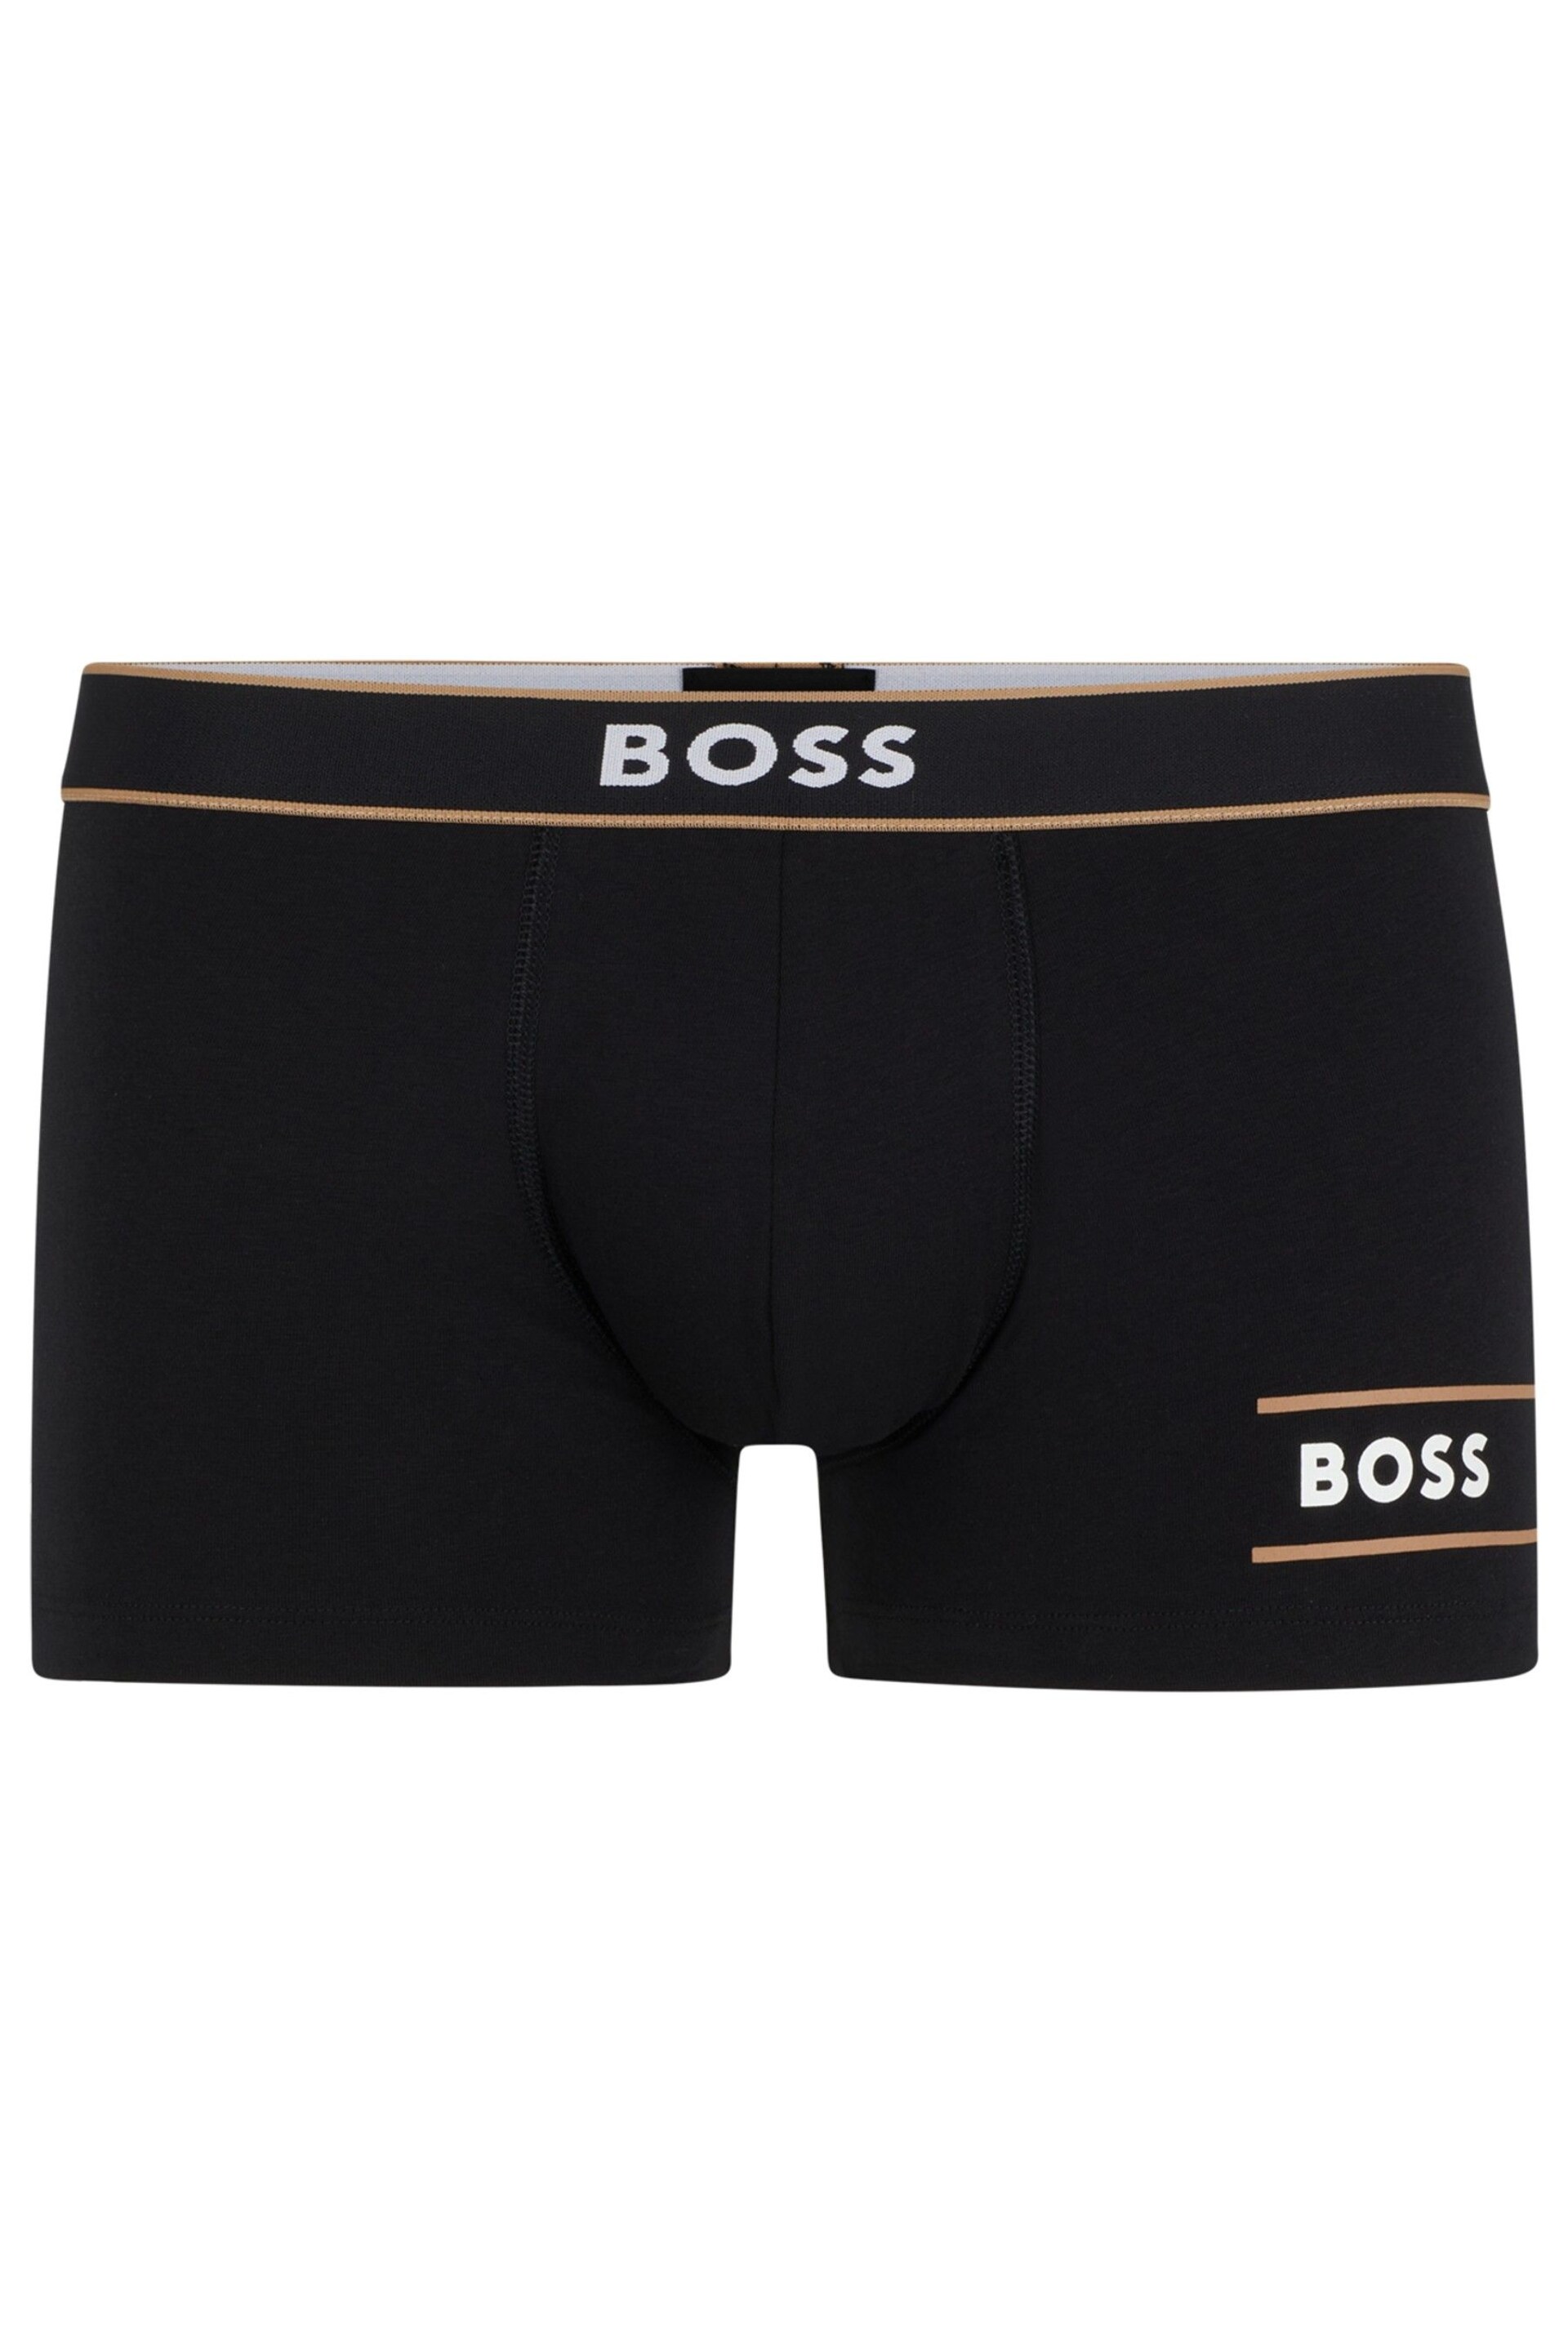 BOSS Black Stretch-cotton Trunks With Stripes And Branding - Image 6 of 6